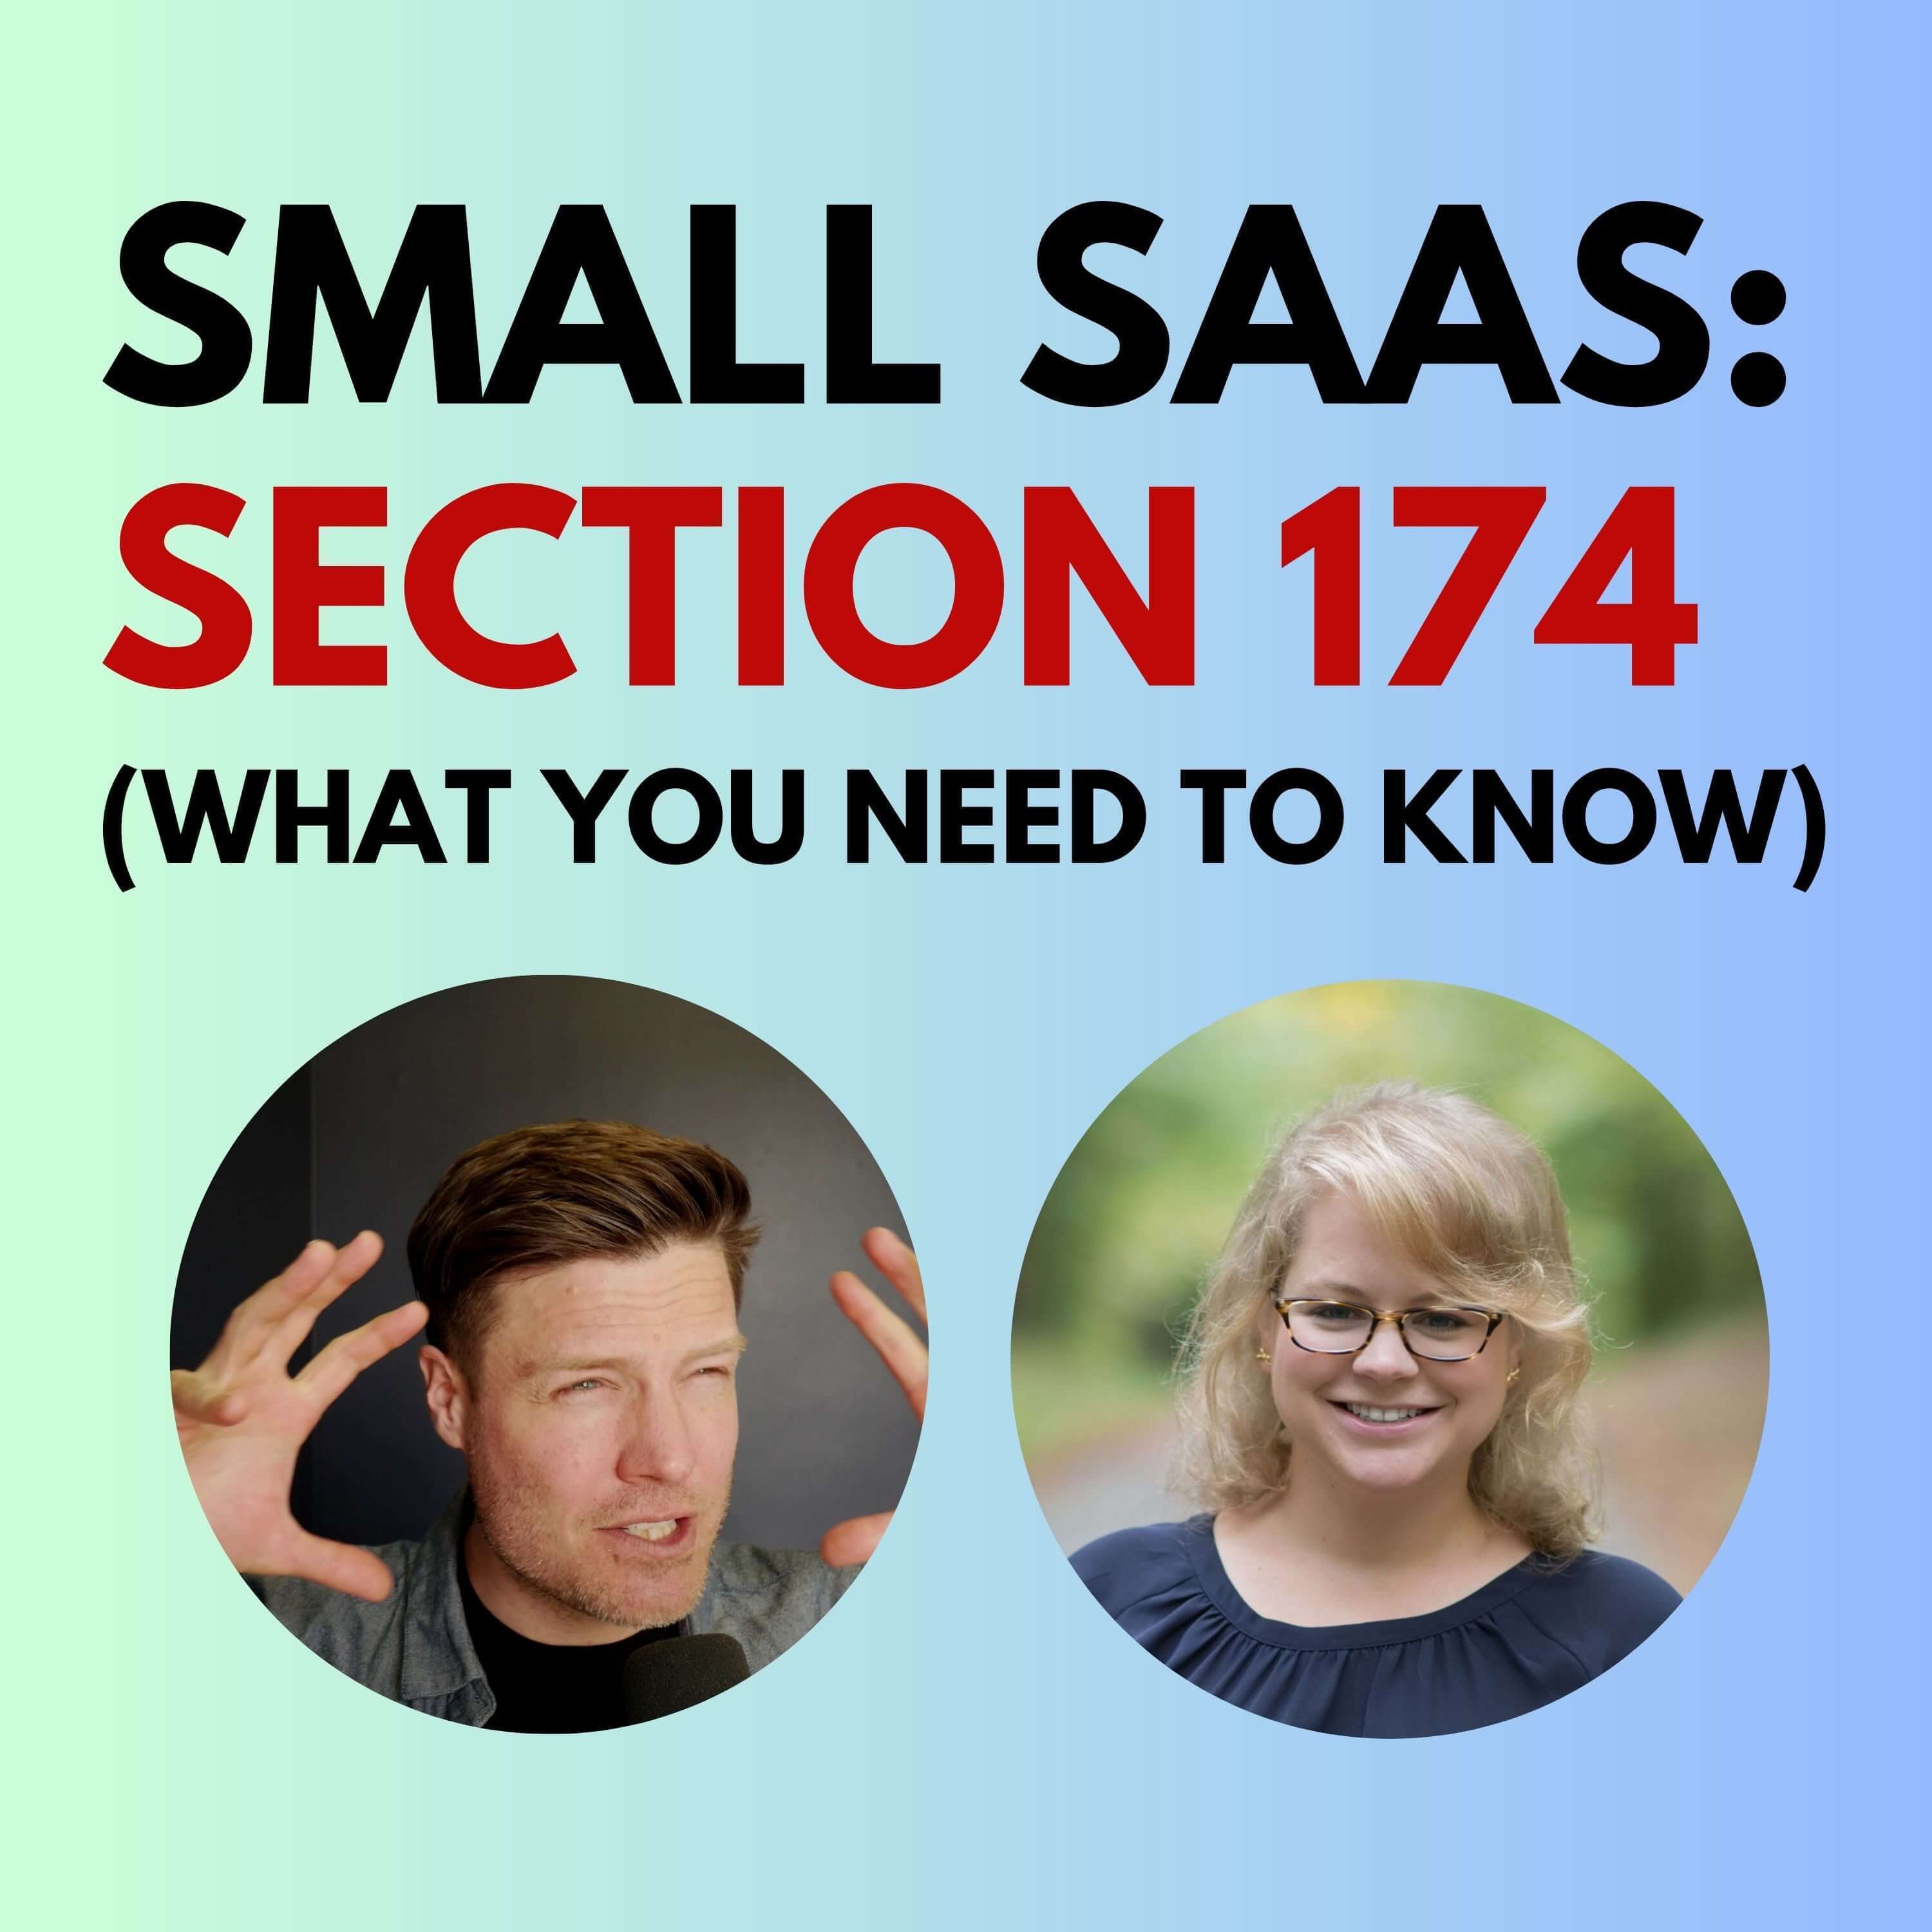 Act now before it’s too late: Section 174